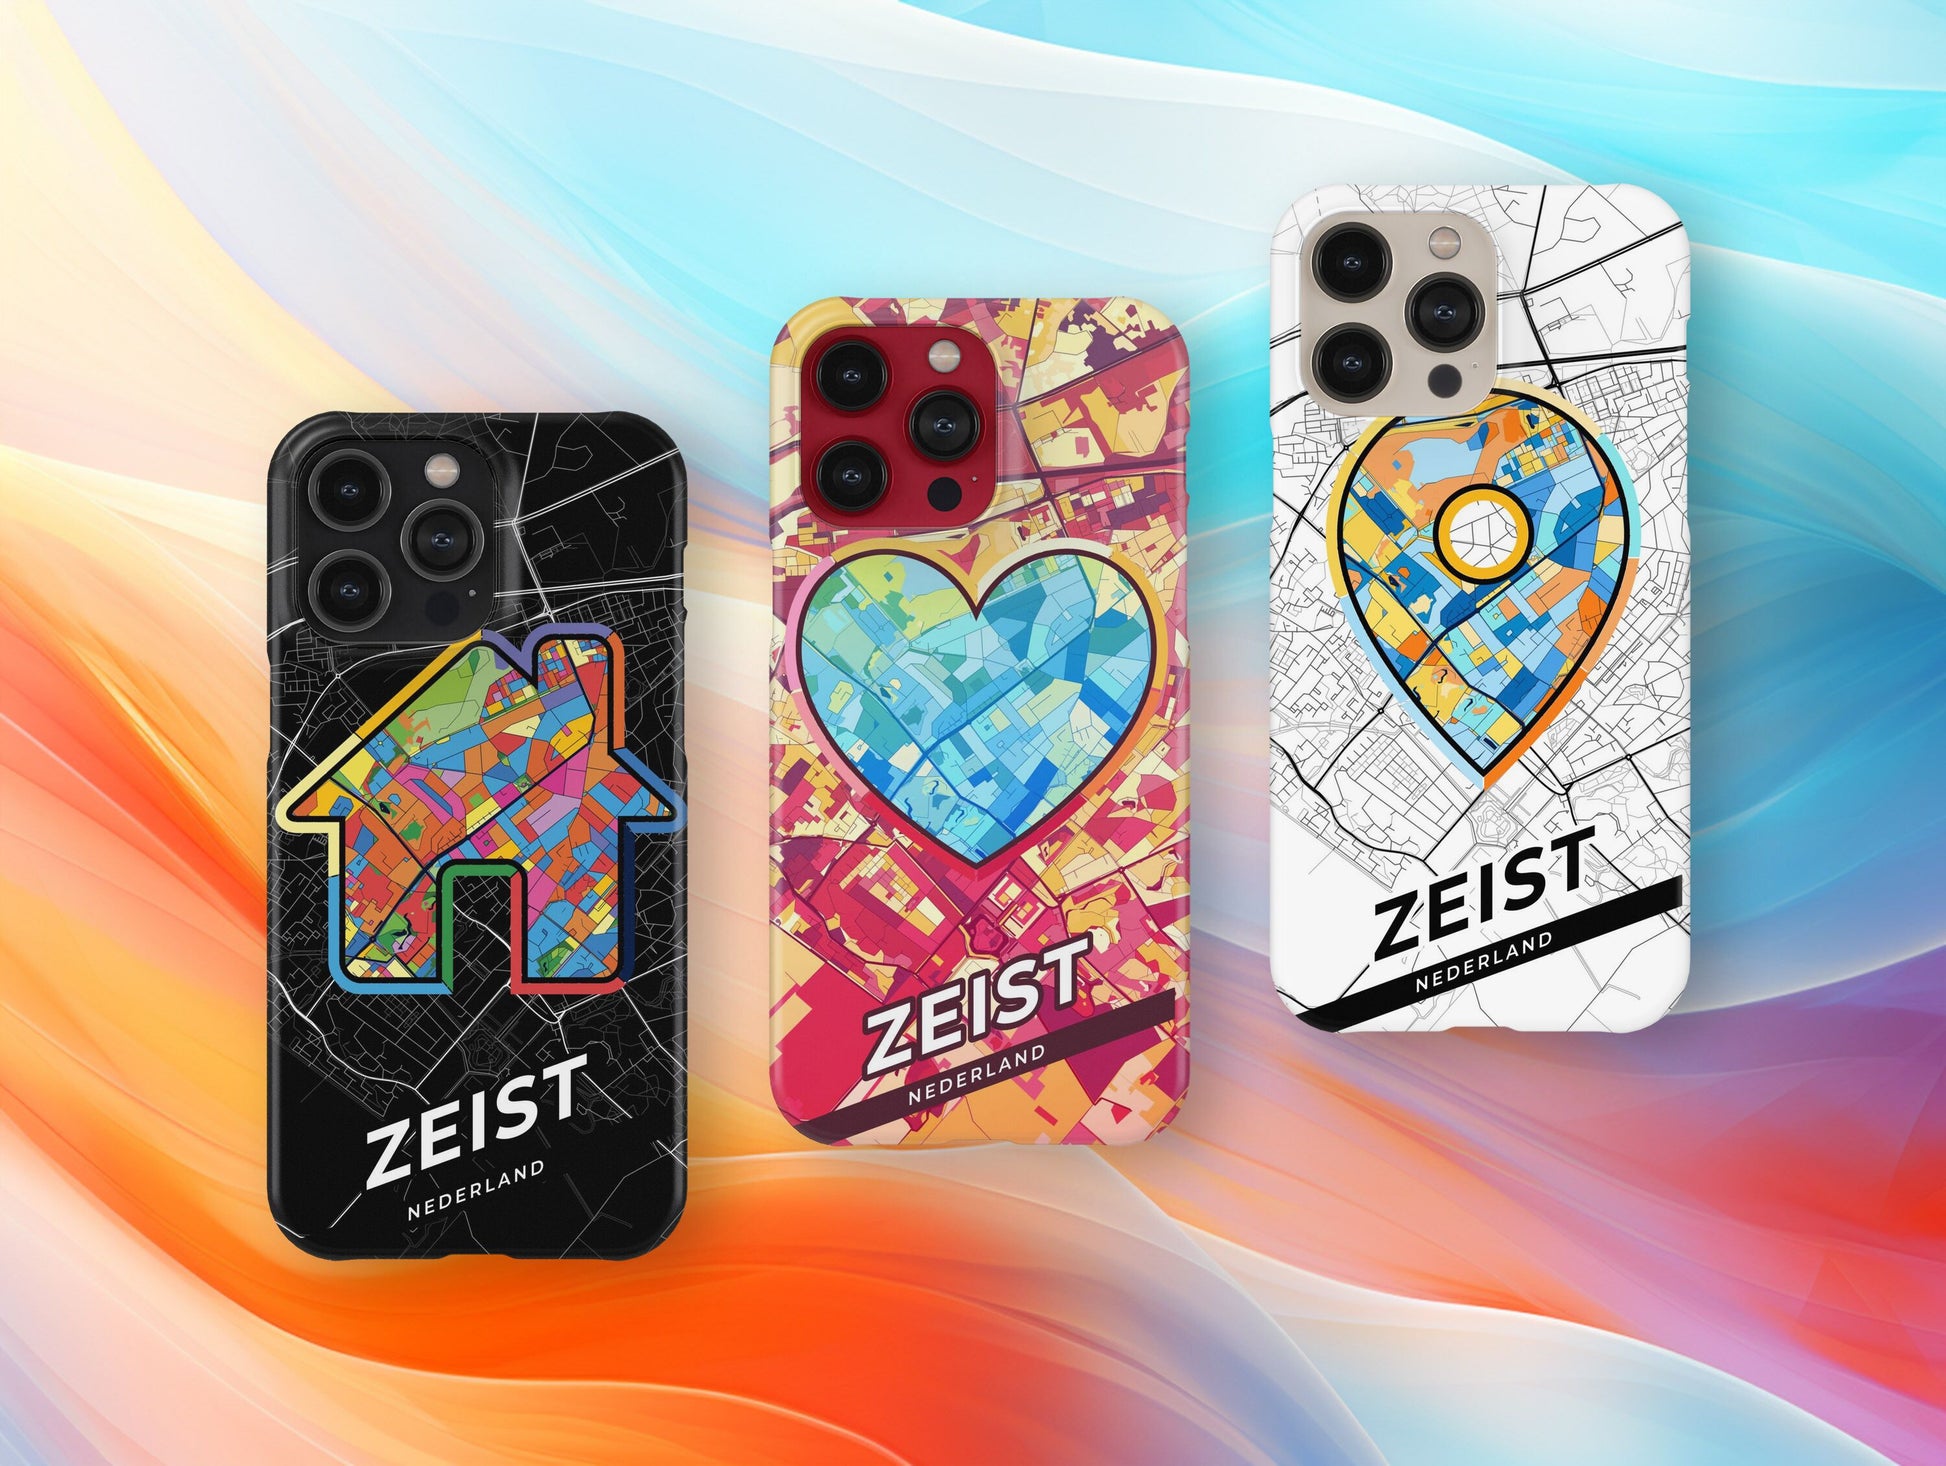 Zeist Netherlands slim phone case with colorful icon